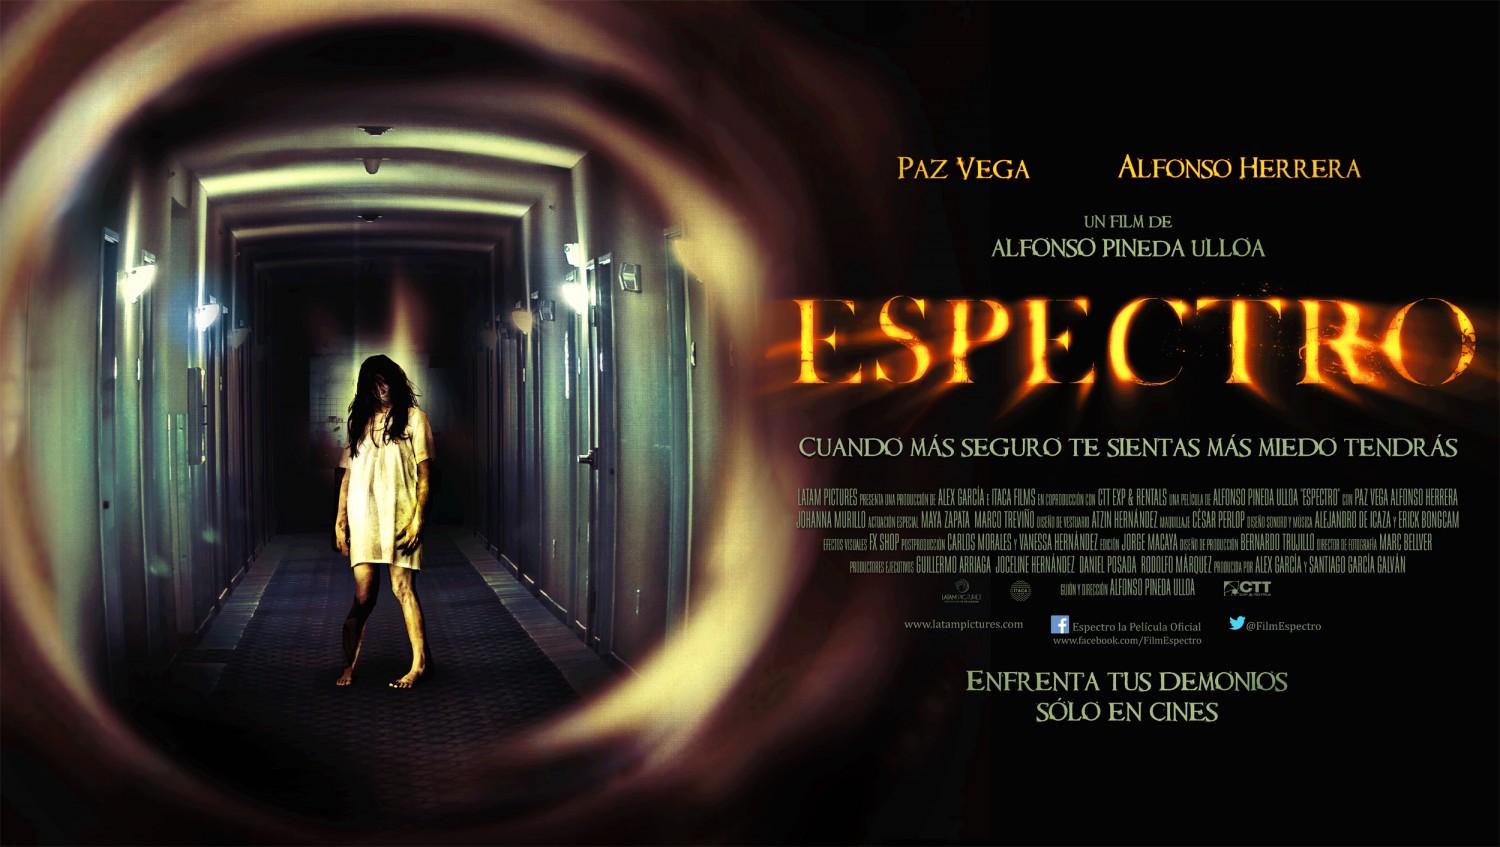 Extra Large Movie Poster Image for Espectro (#2 of 2)